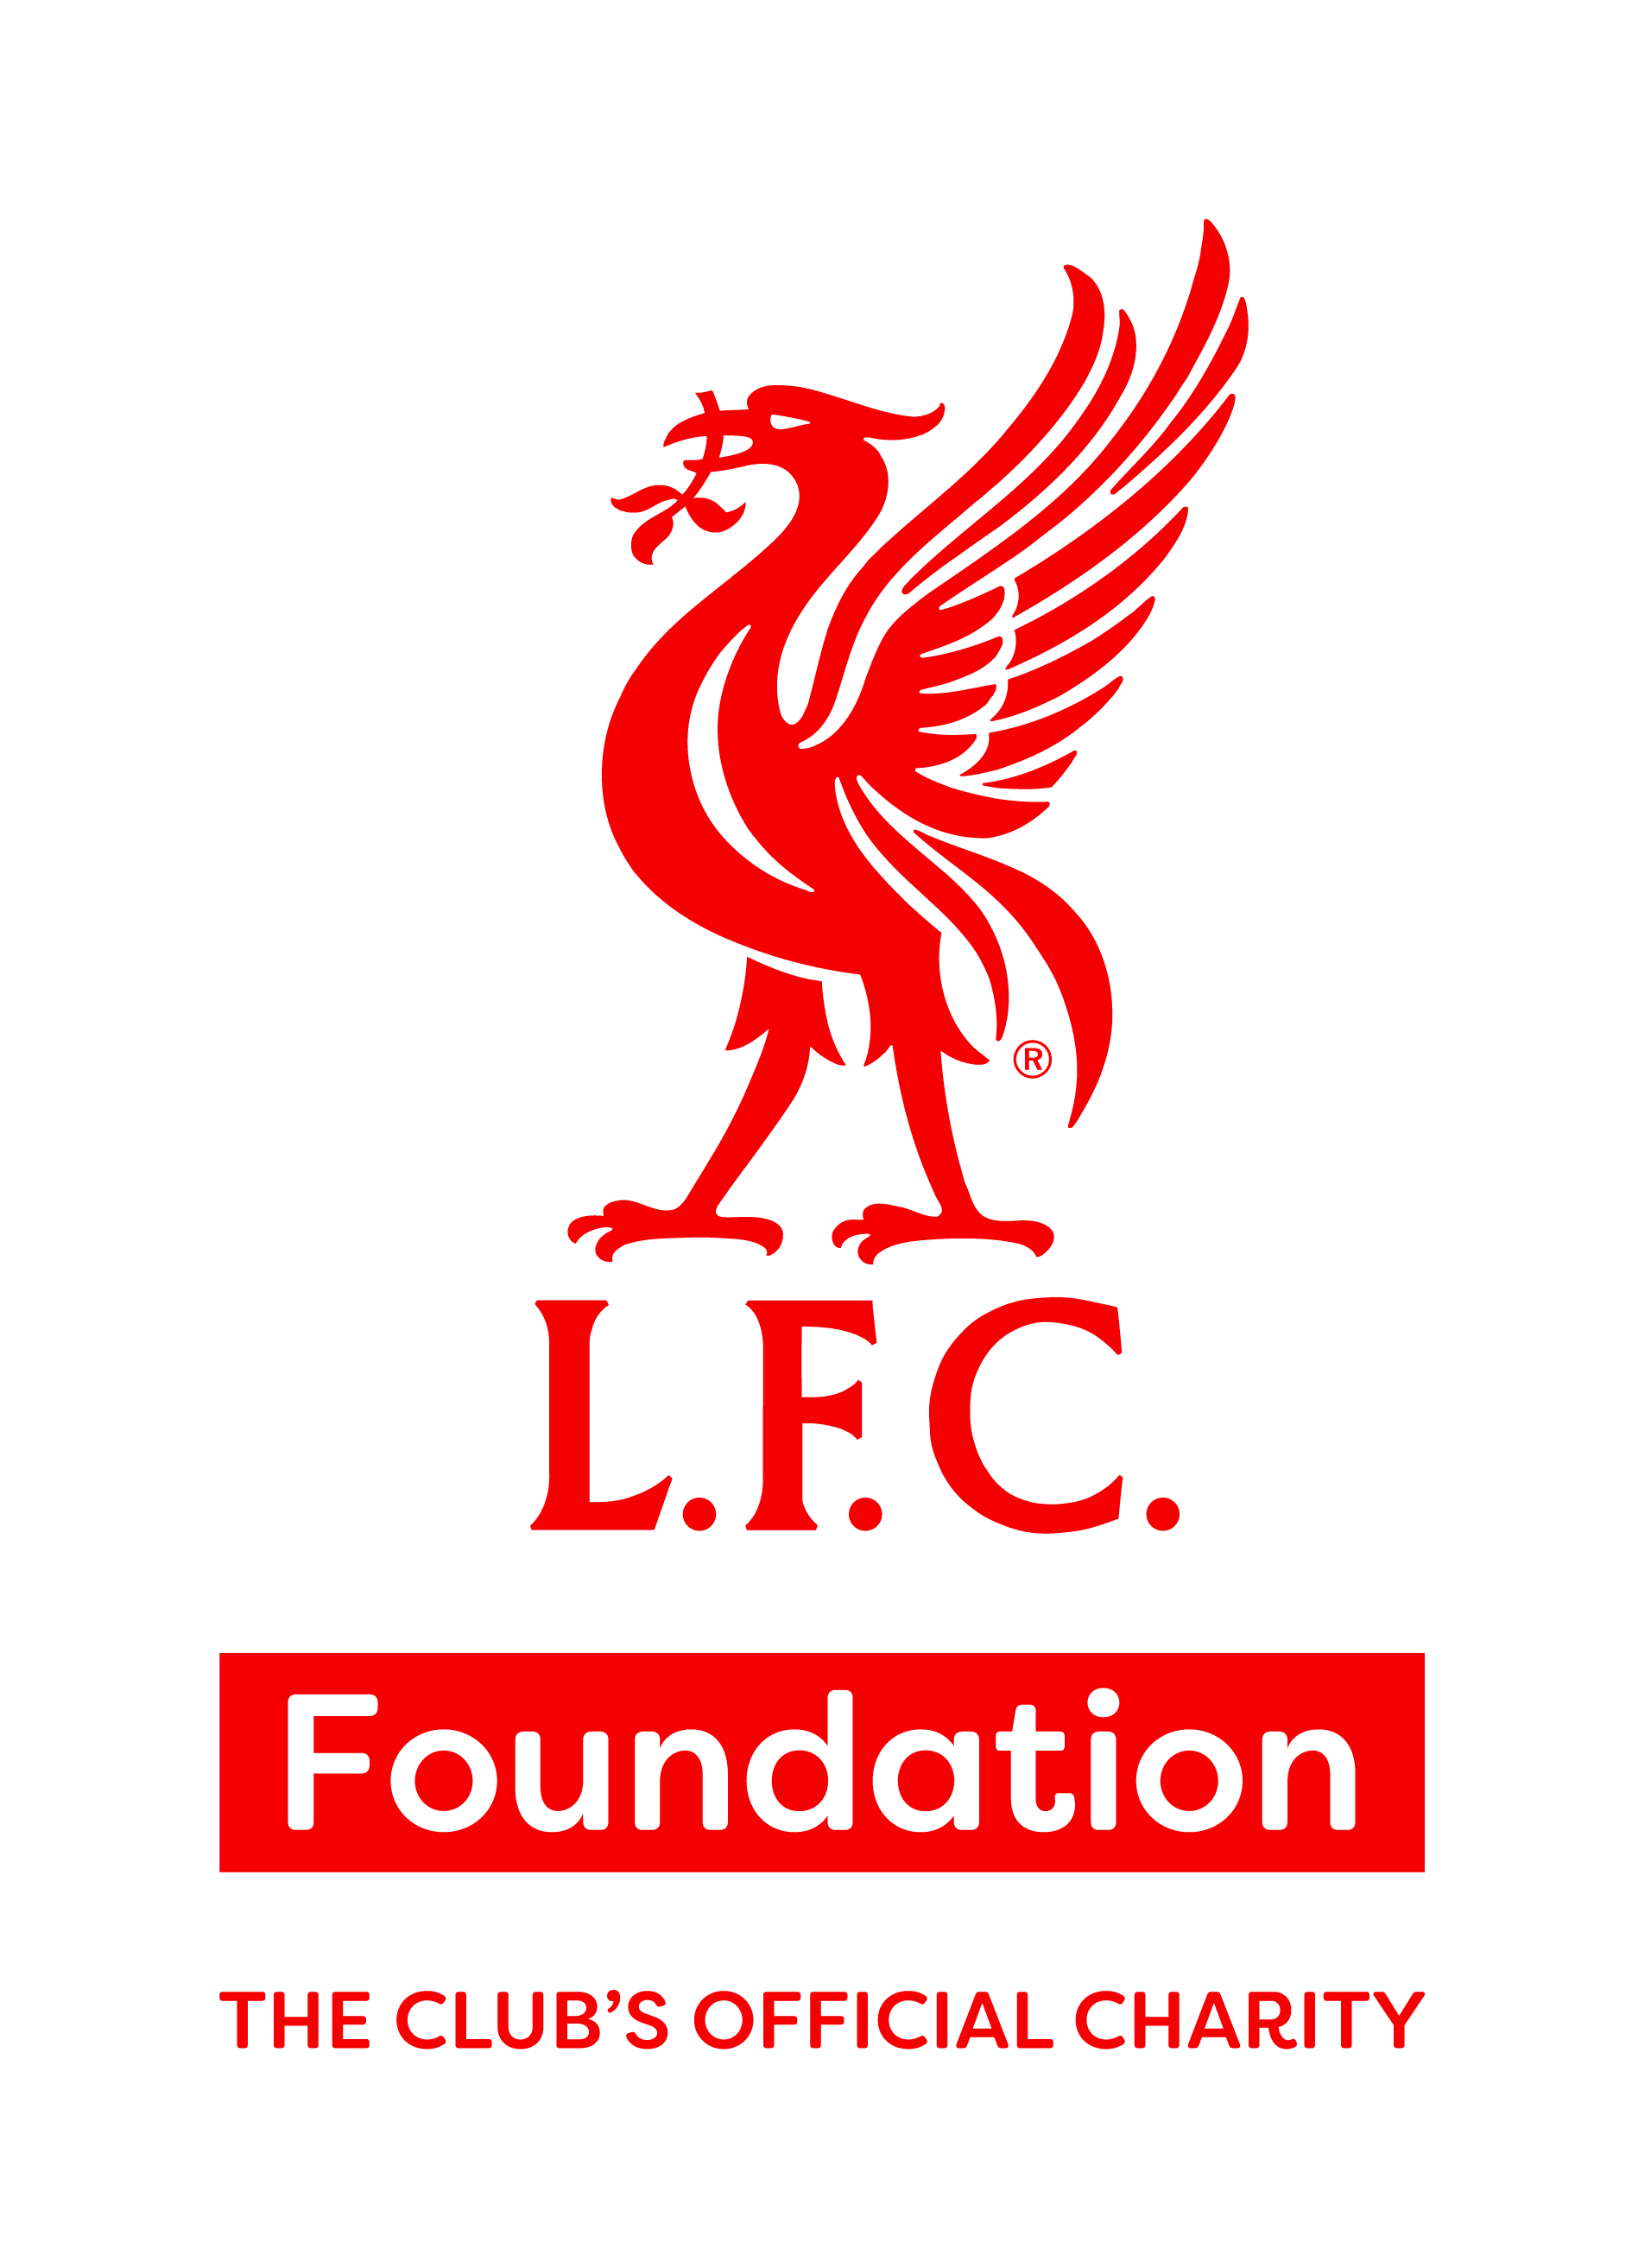 The LFC Foundation is the official charity of Liverpool Football Club — https://foundation.liverpoolfc.com